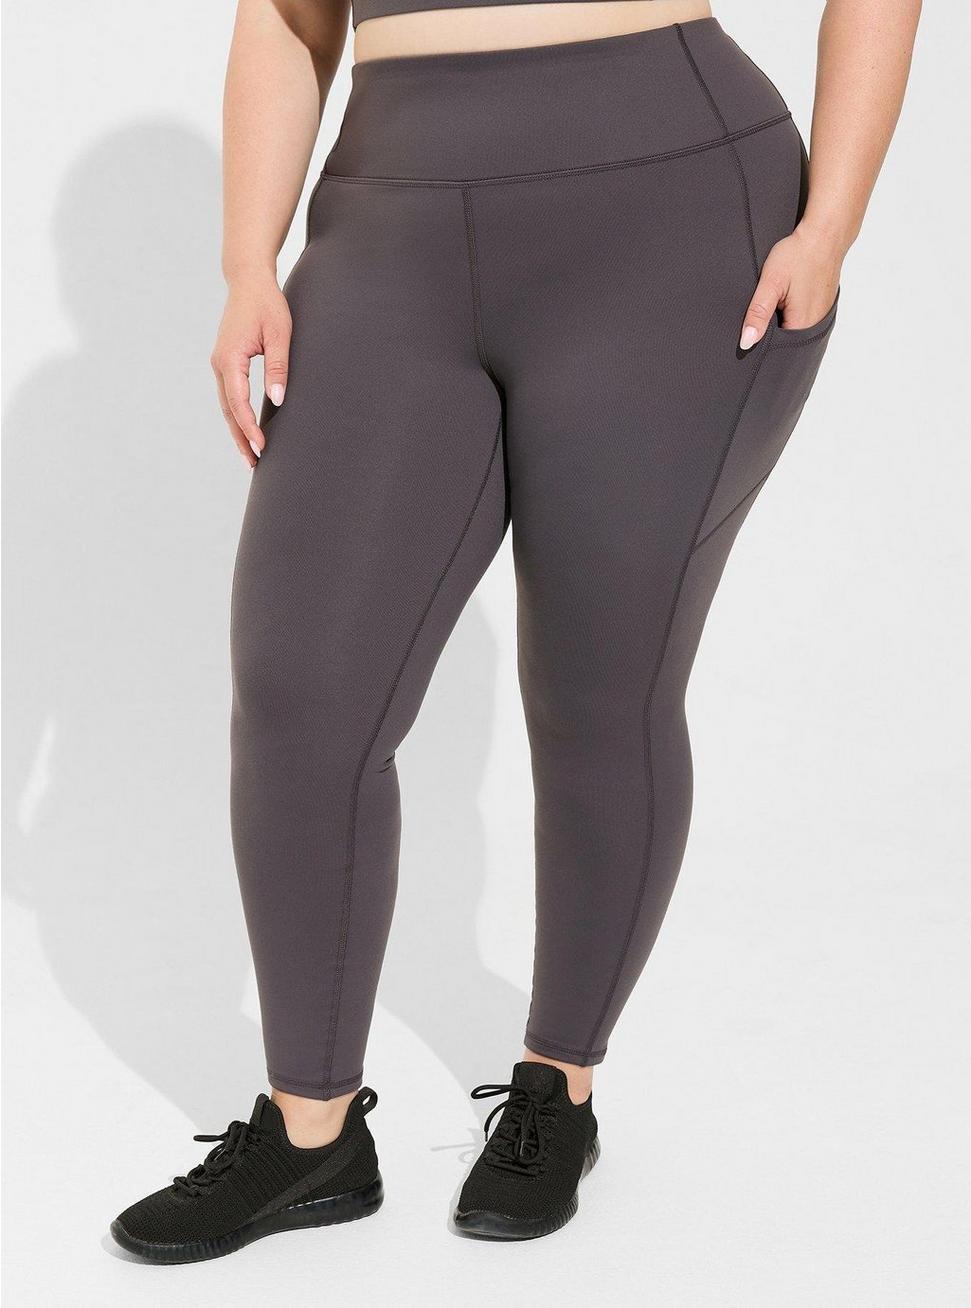 Plus Size Performance Core Full Length Active Legging With Side Pockets, PERISCOPE, alternate